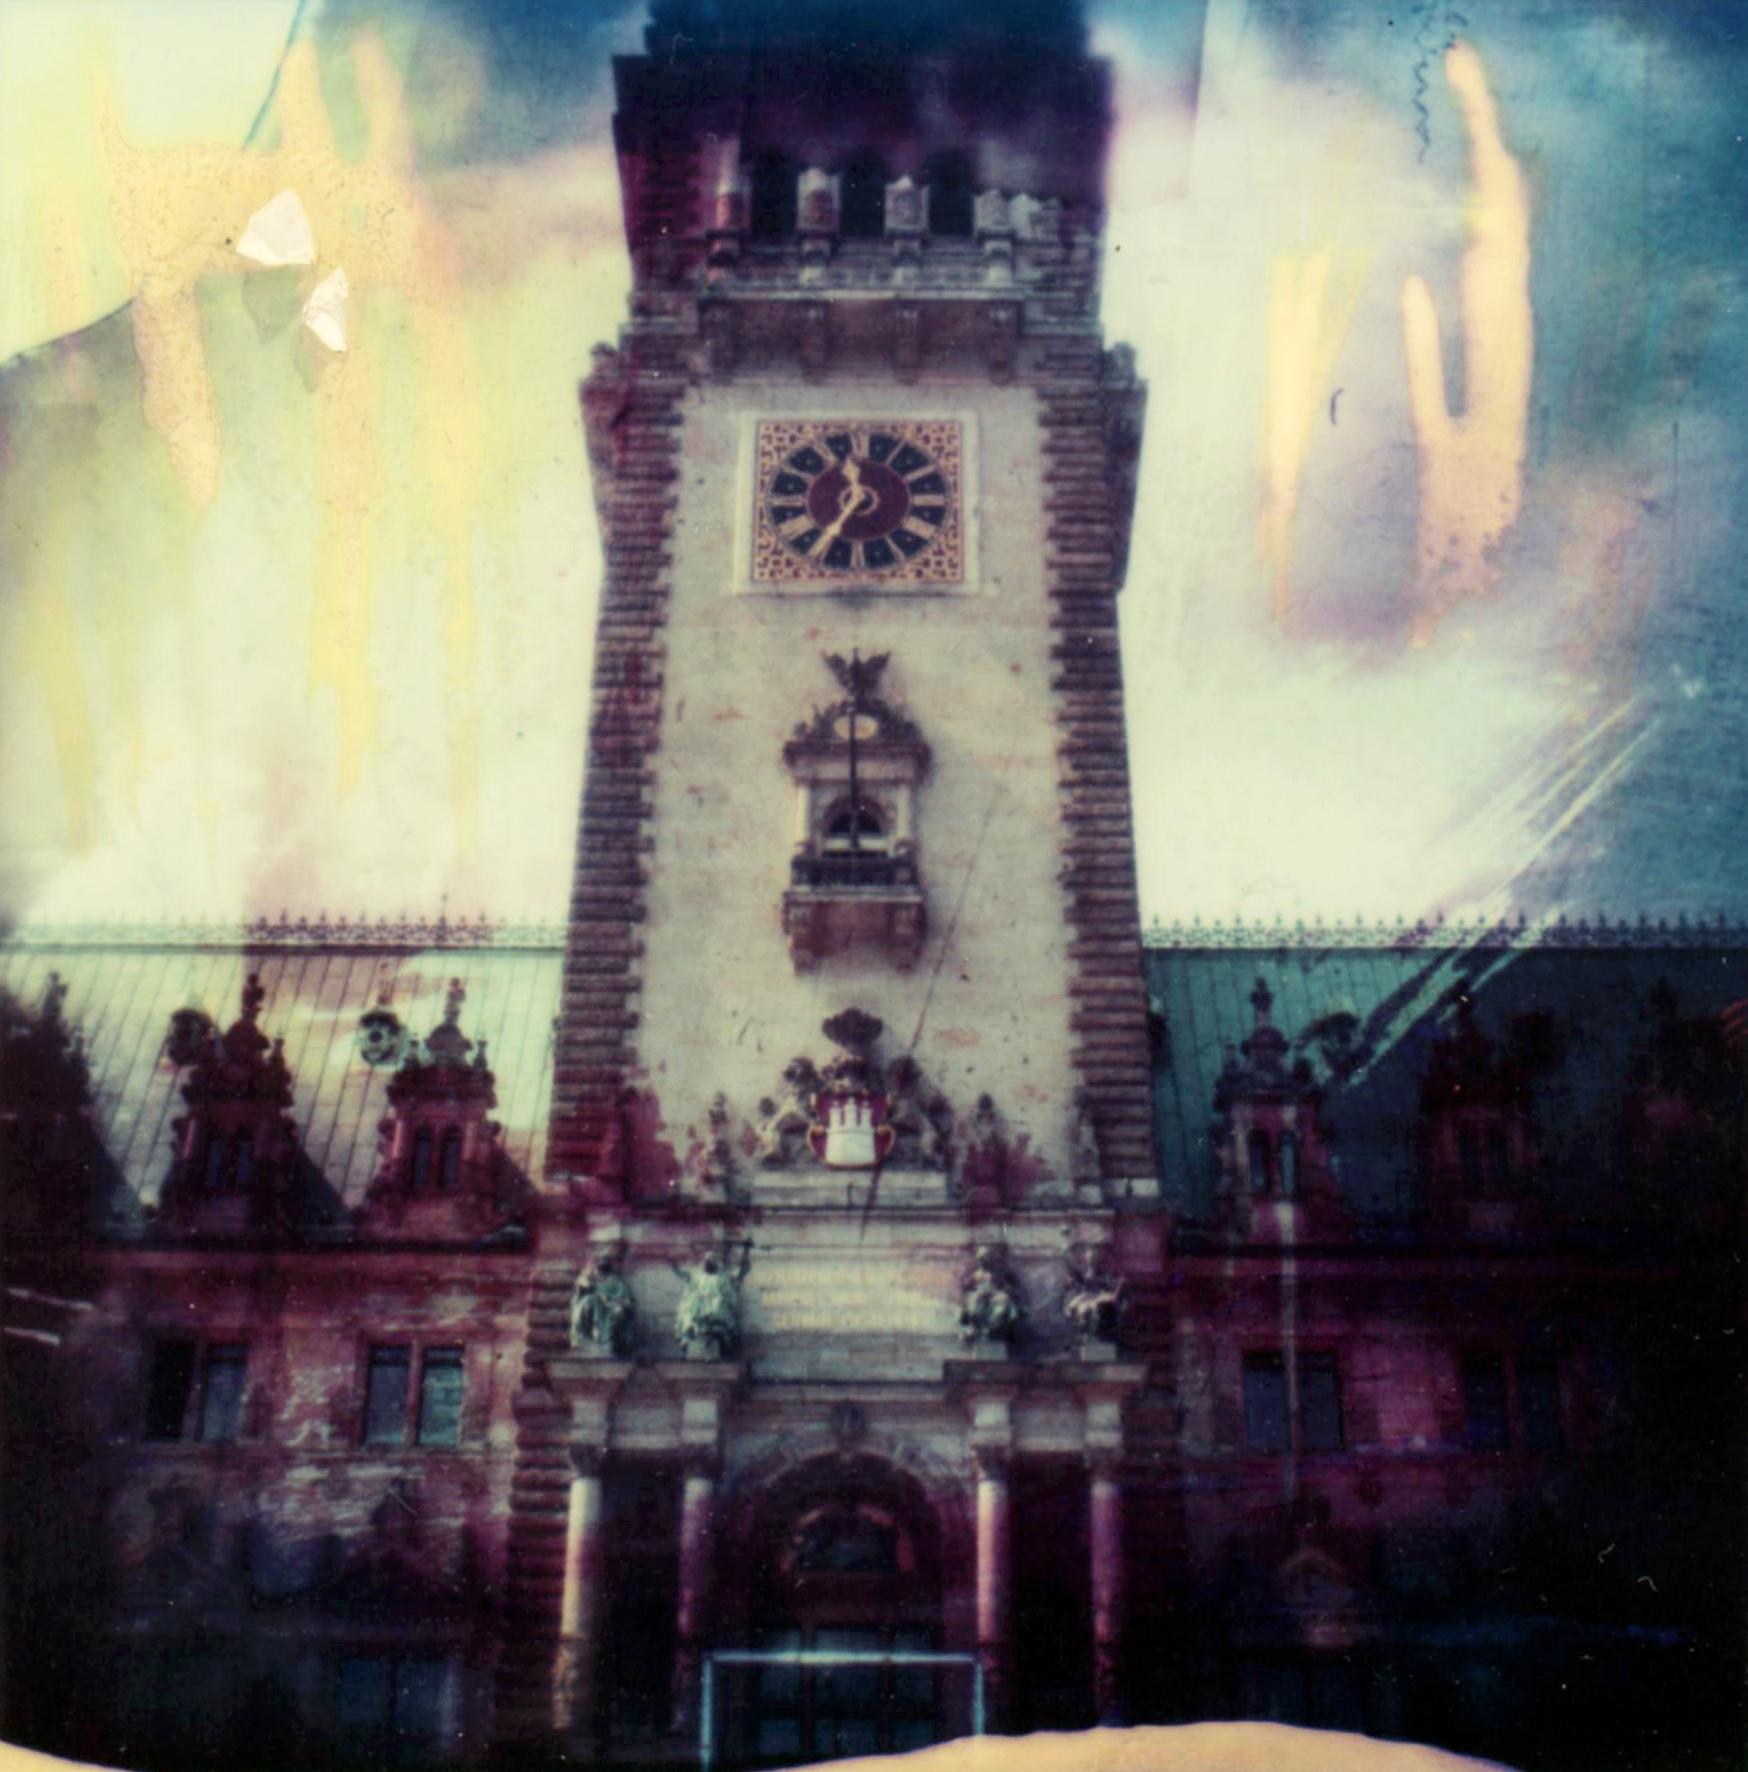 Hamburg-Rathaus #02 (Been there, done that) - Polaroid, Landscape, US, Color